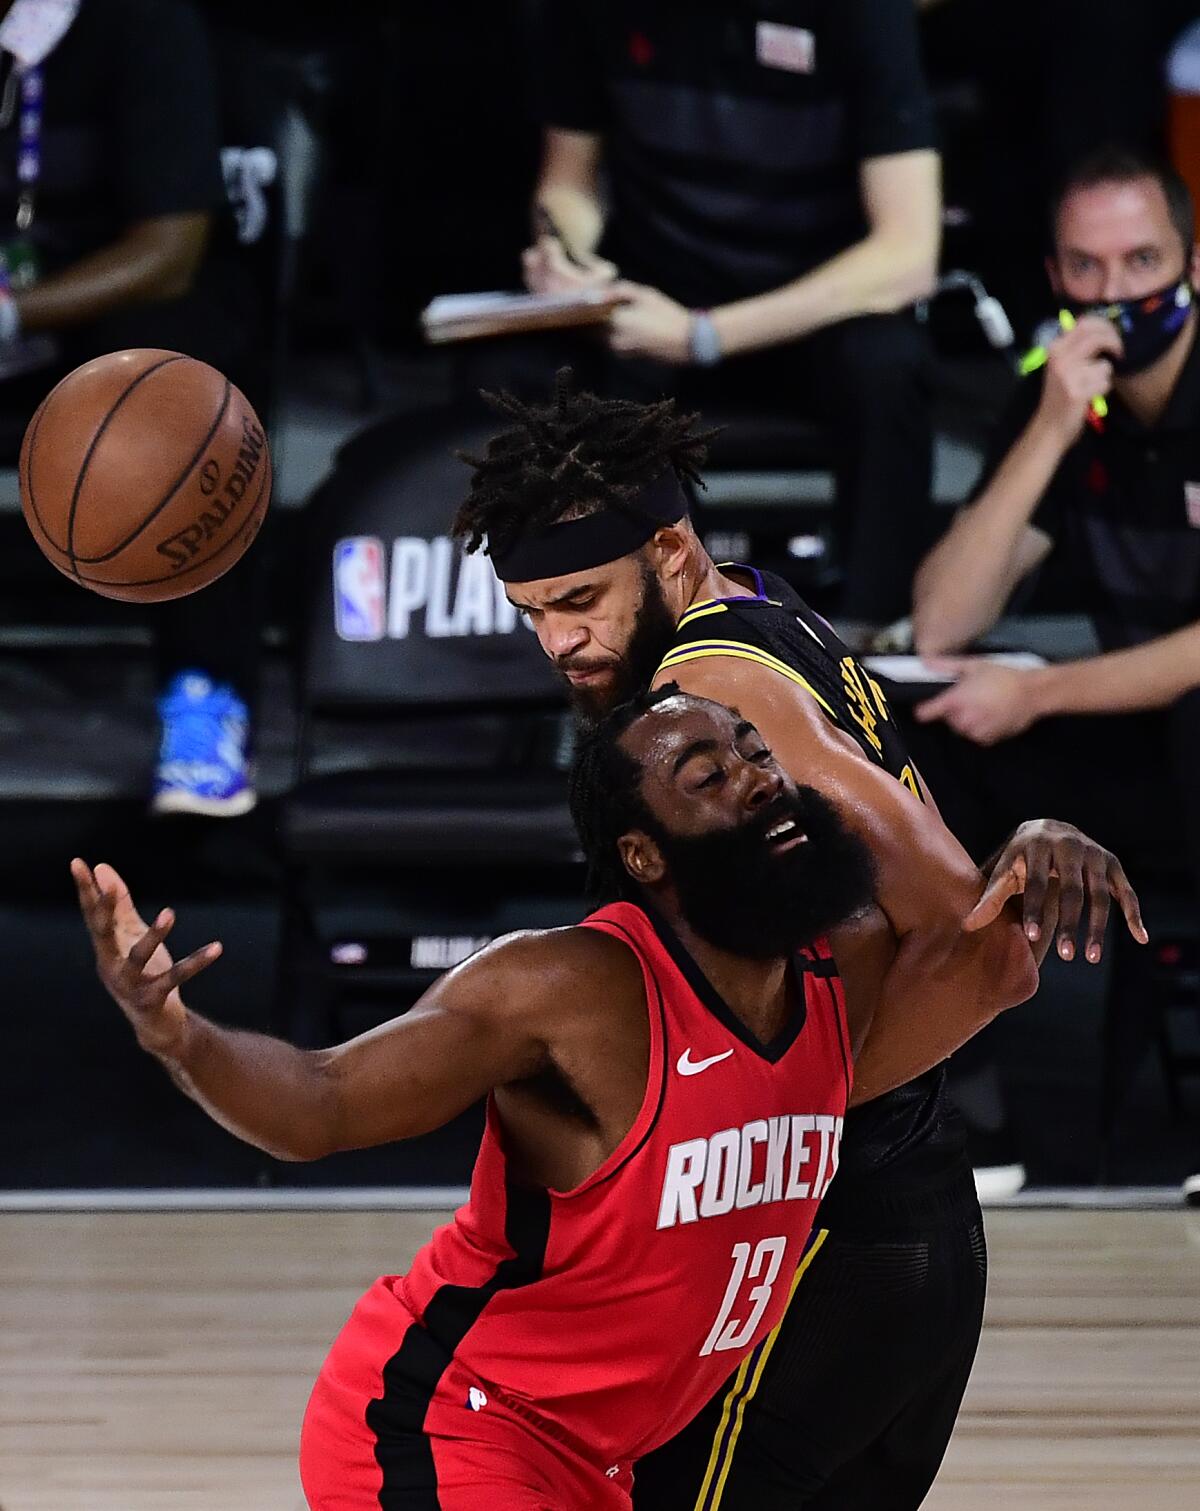  James Harden of the Houston Rockets is defended by JaVale McGee of the Lakers.